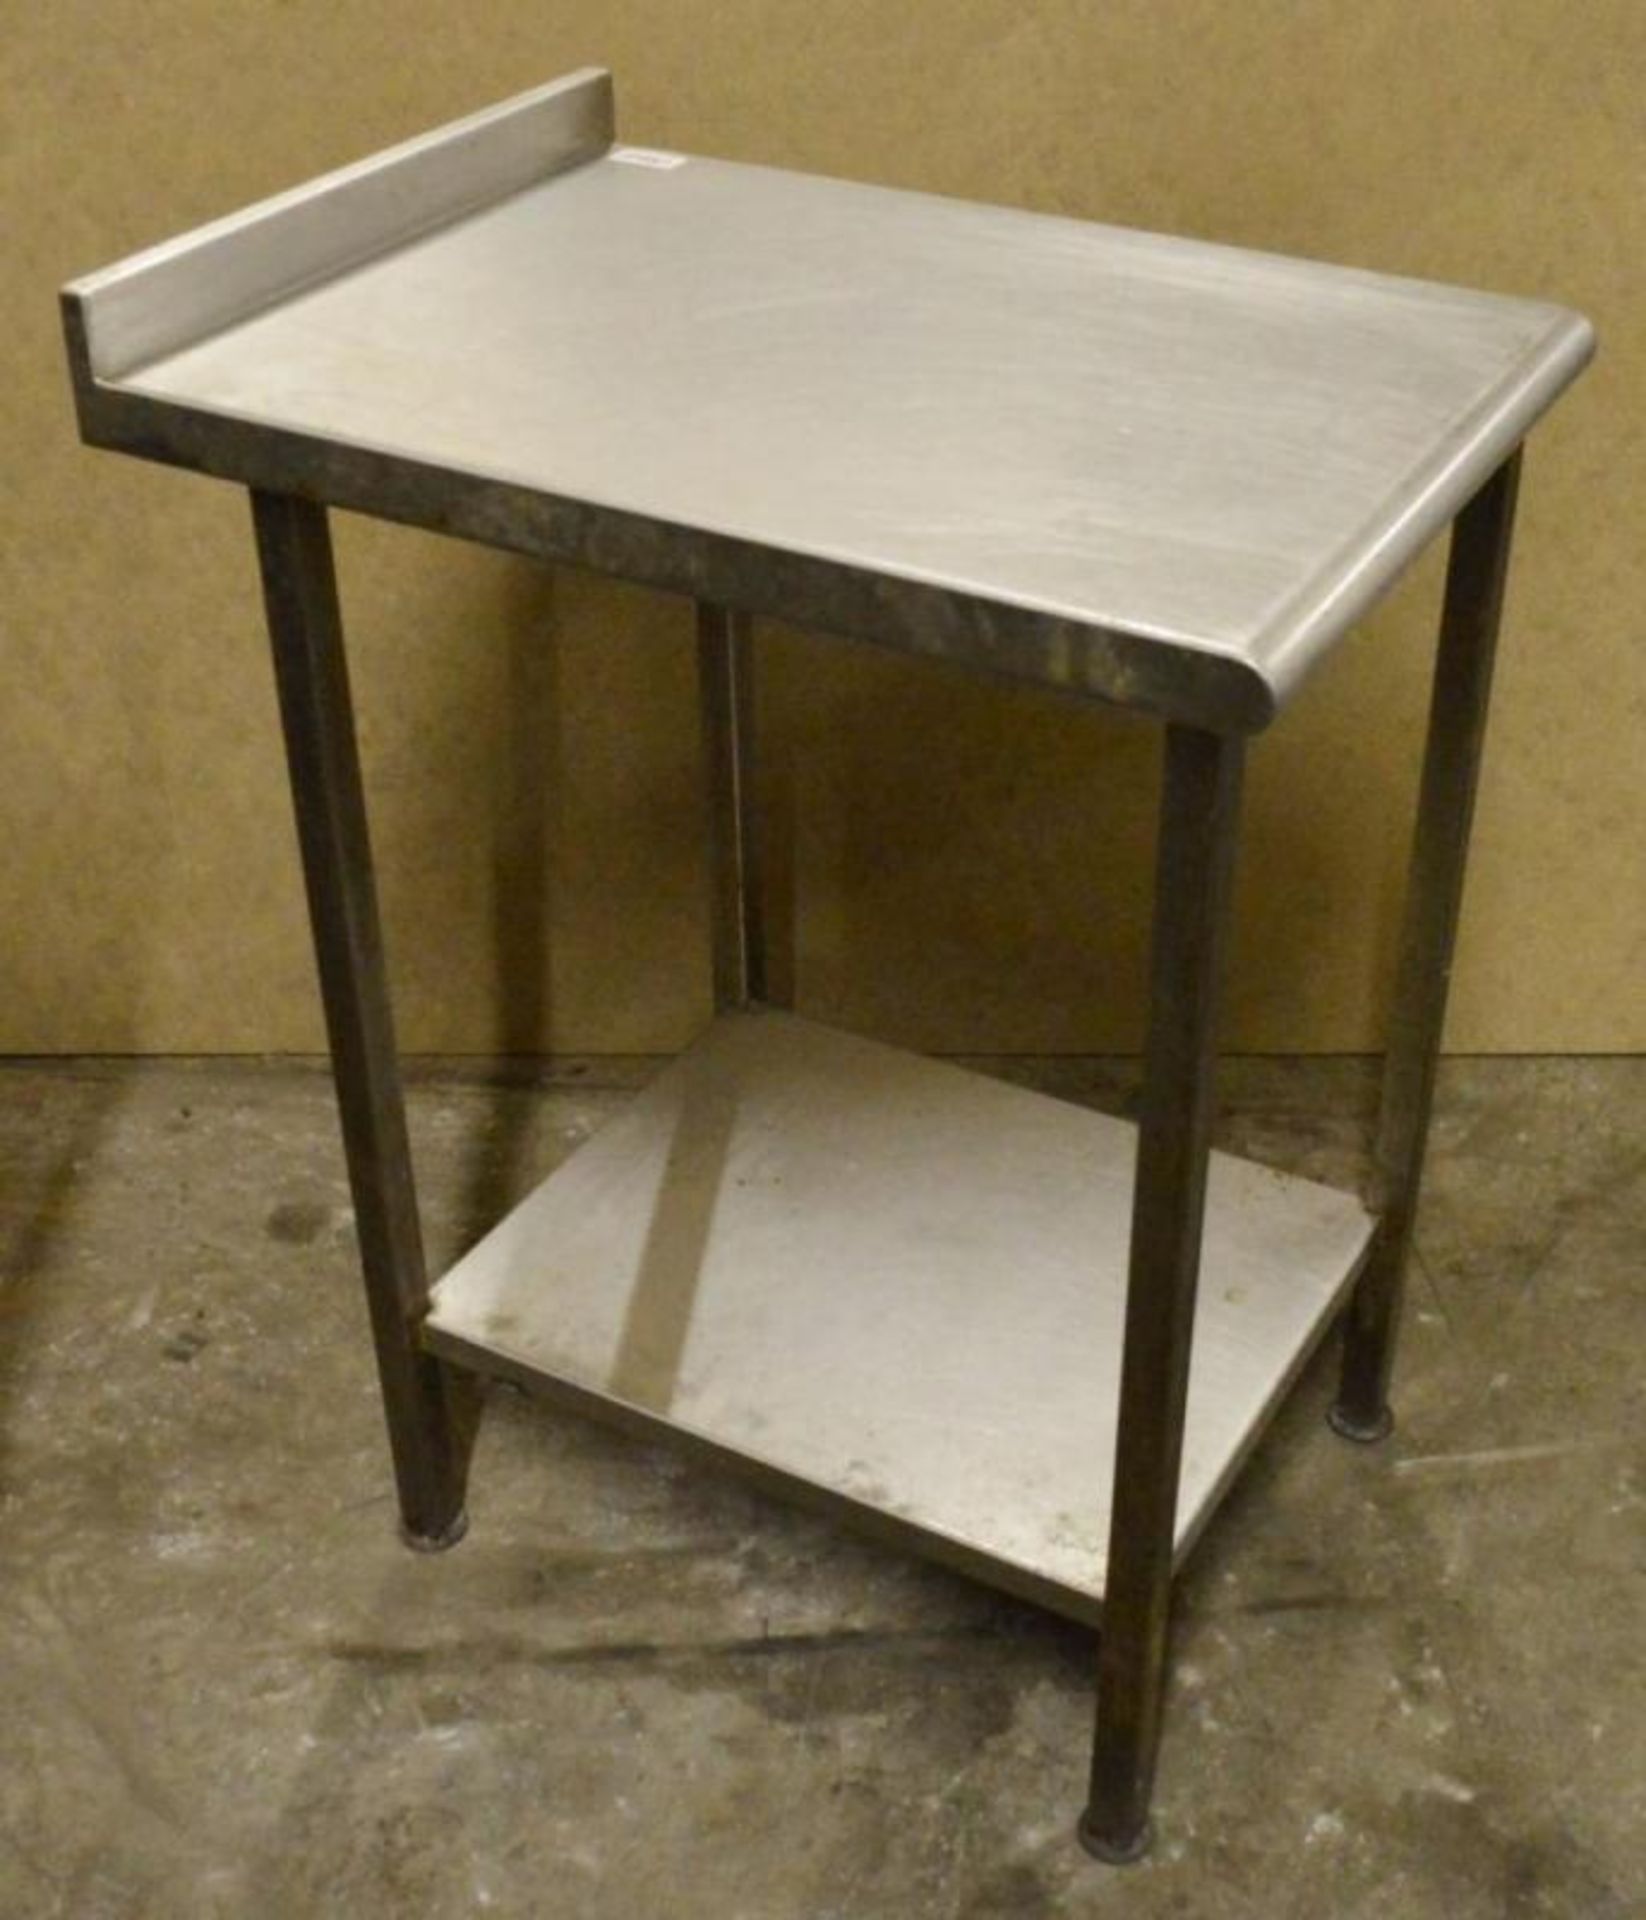 1 x Stainless Steel Prep Table With Undershelf and Backsplash - H86 x W50 x D70 cms - CL282 - Ref JP